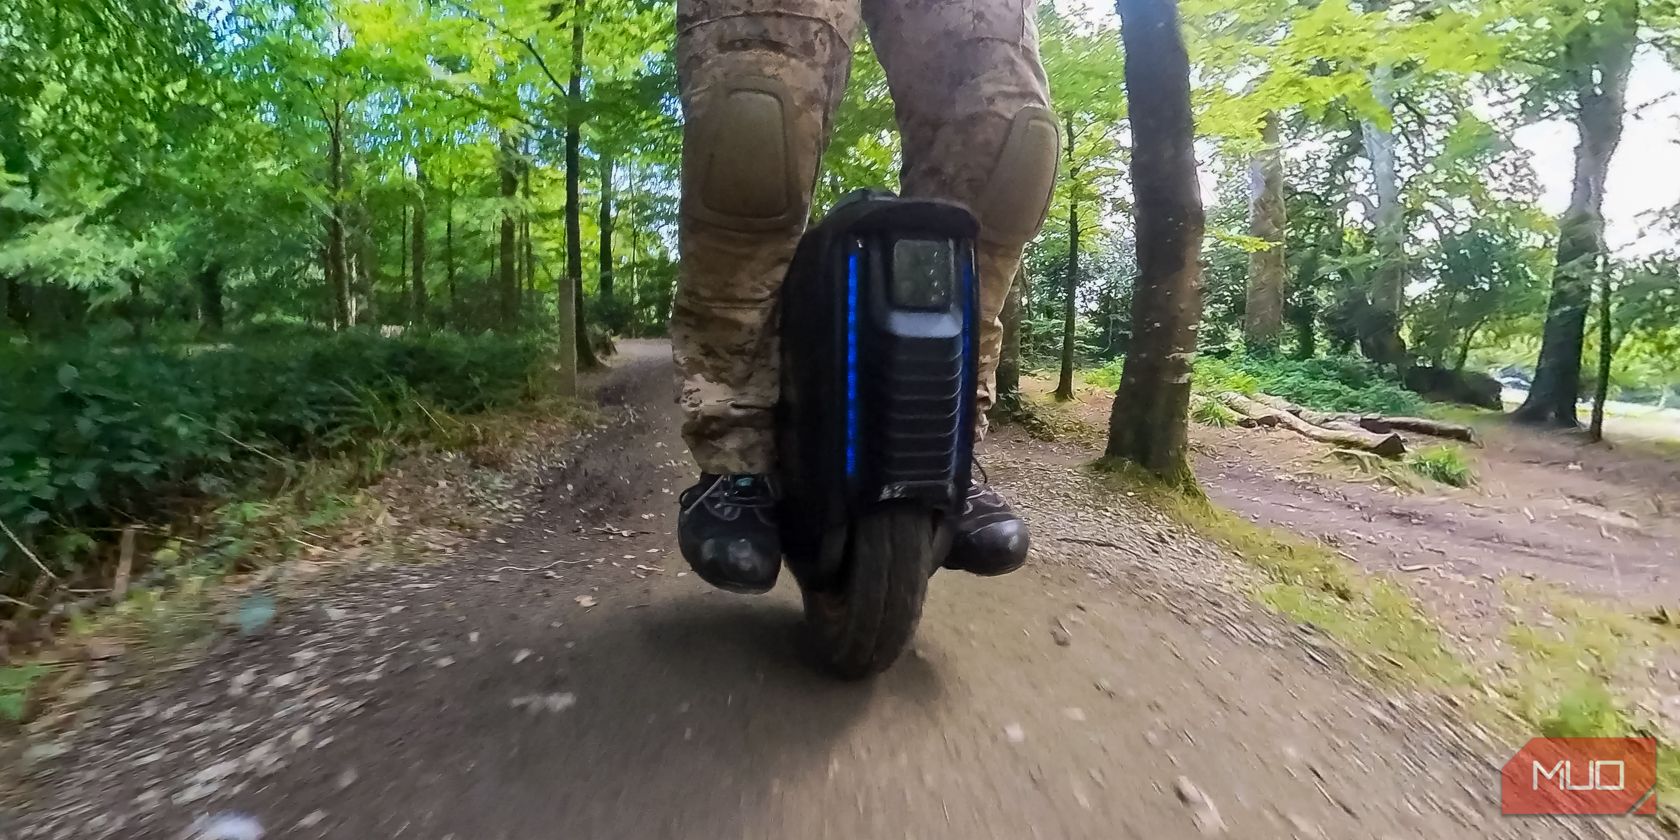 InMotion V12HT is the Ultimate Hill-Climbing EUC for Commuting and Fun